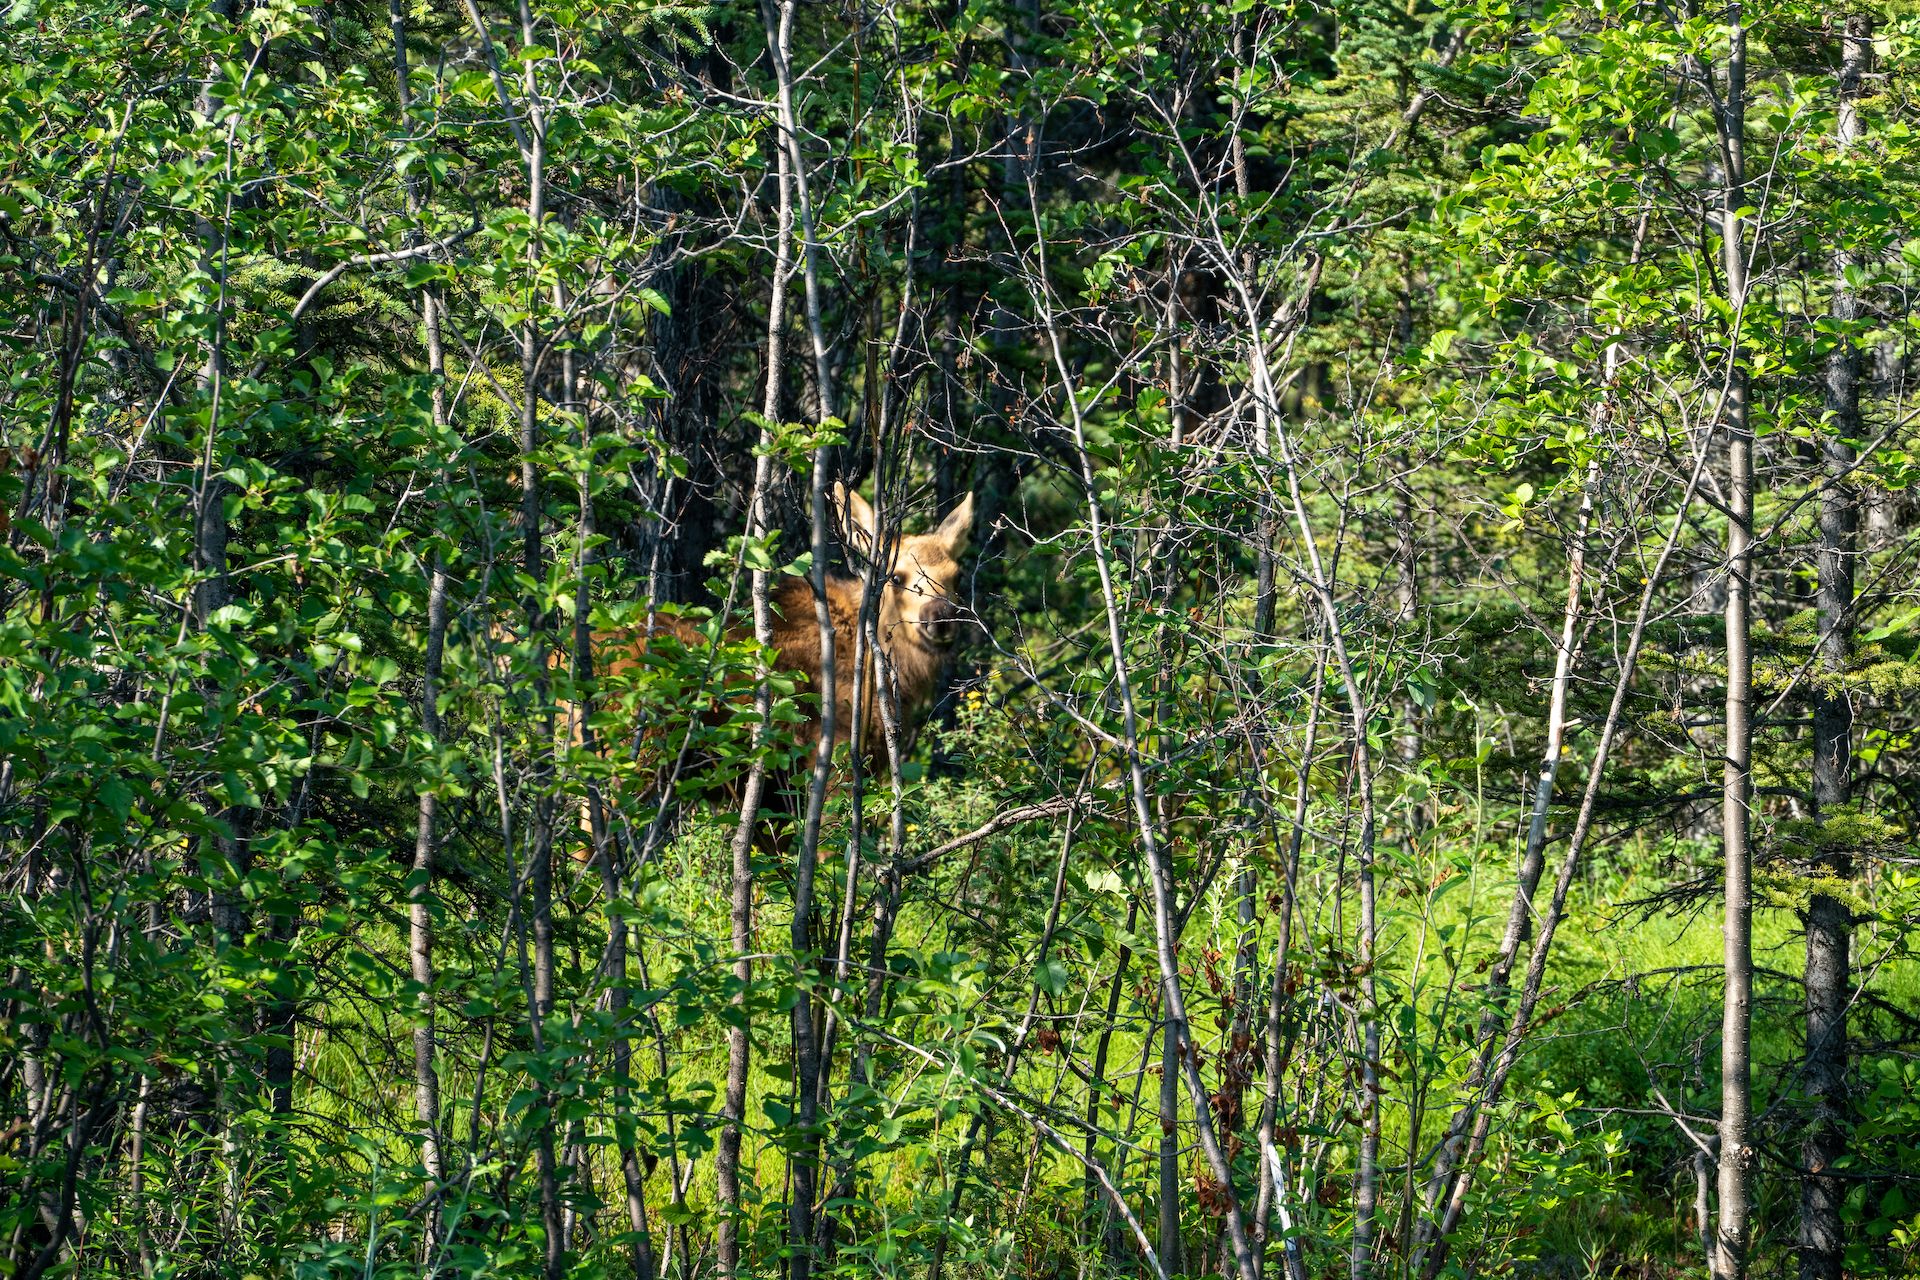 Spotted a baby moose!